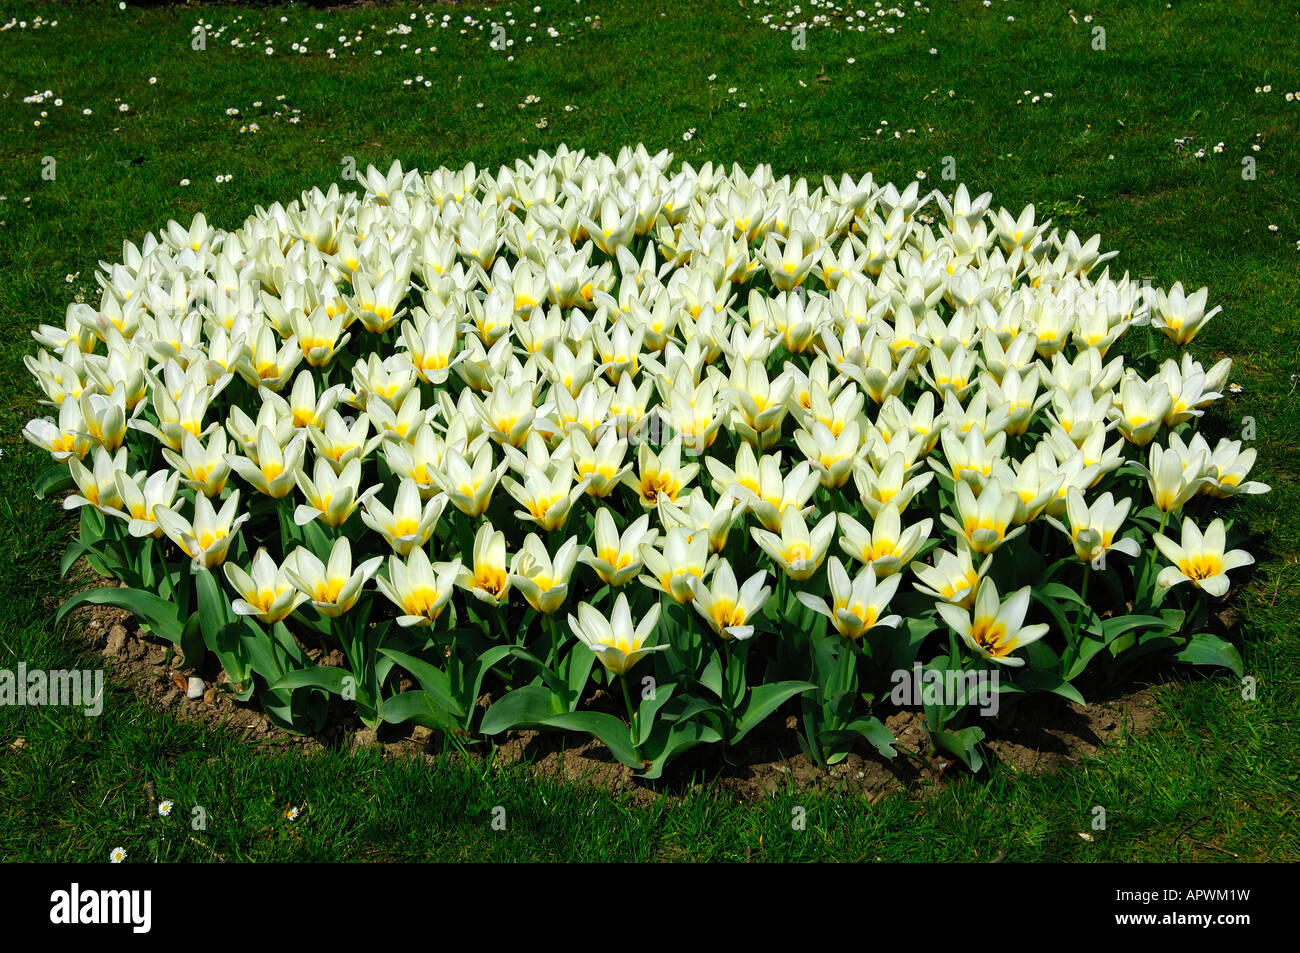 Round flower bed with white tulips Stock Photo